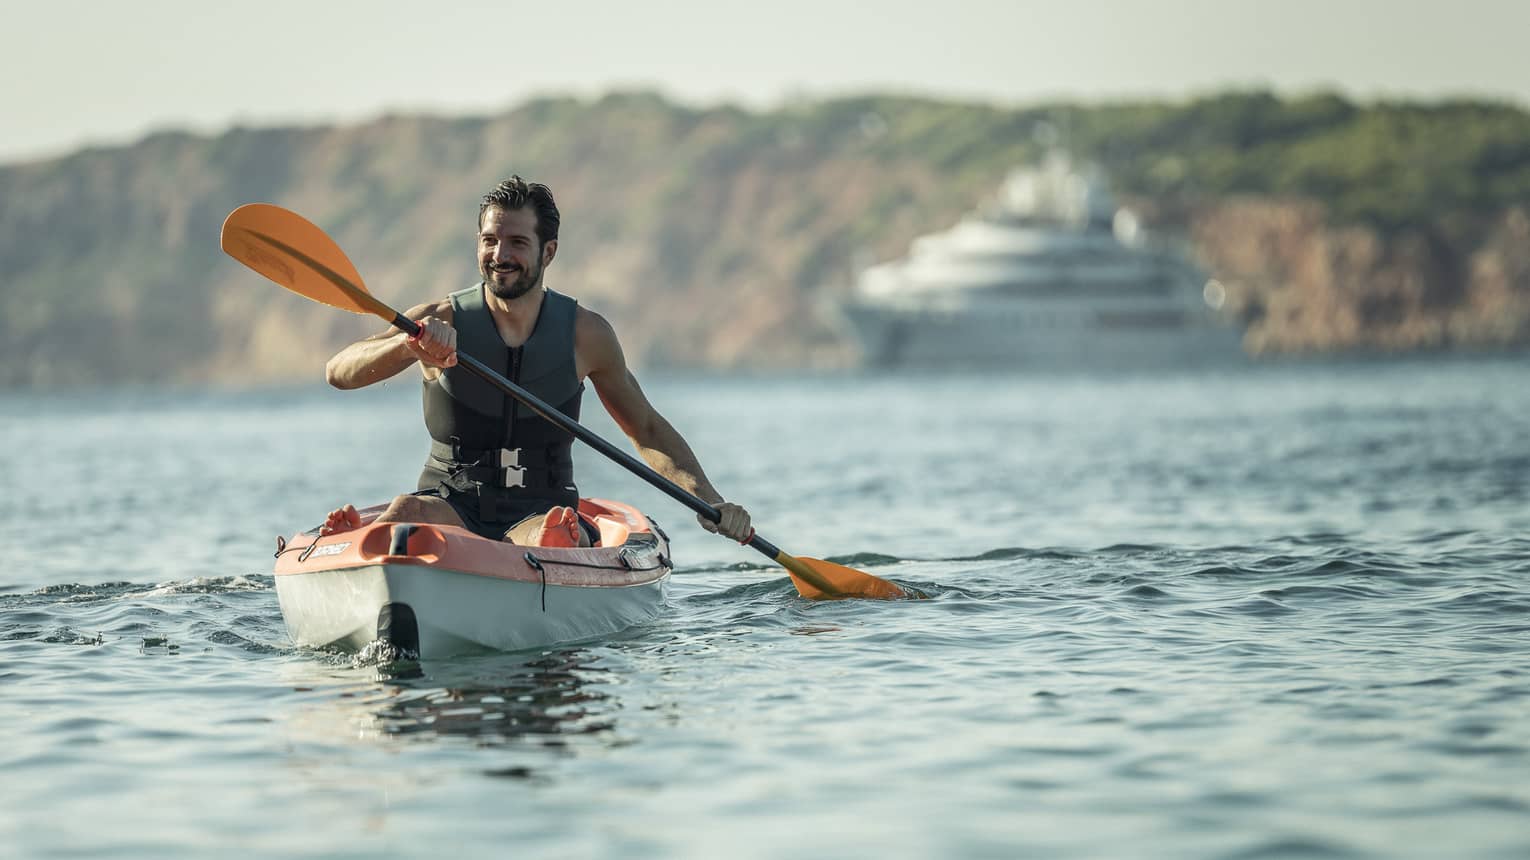 Man smiling while kayaking in sea, yacht and rocky coast in backdrop